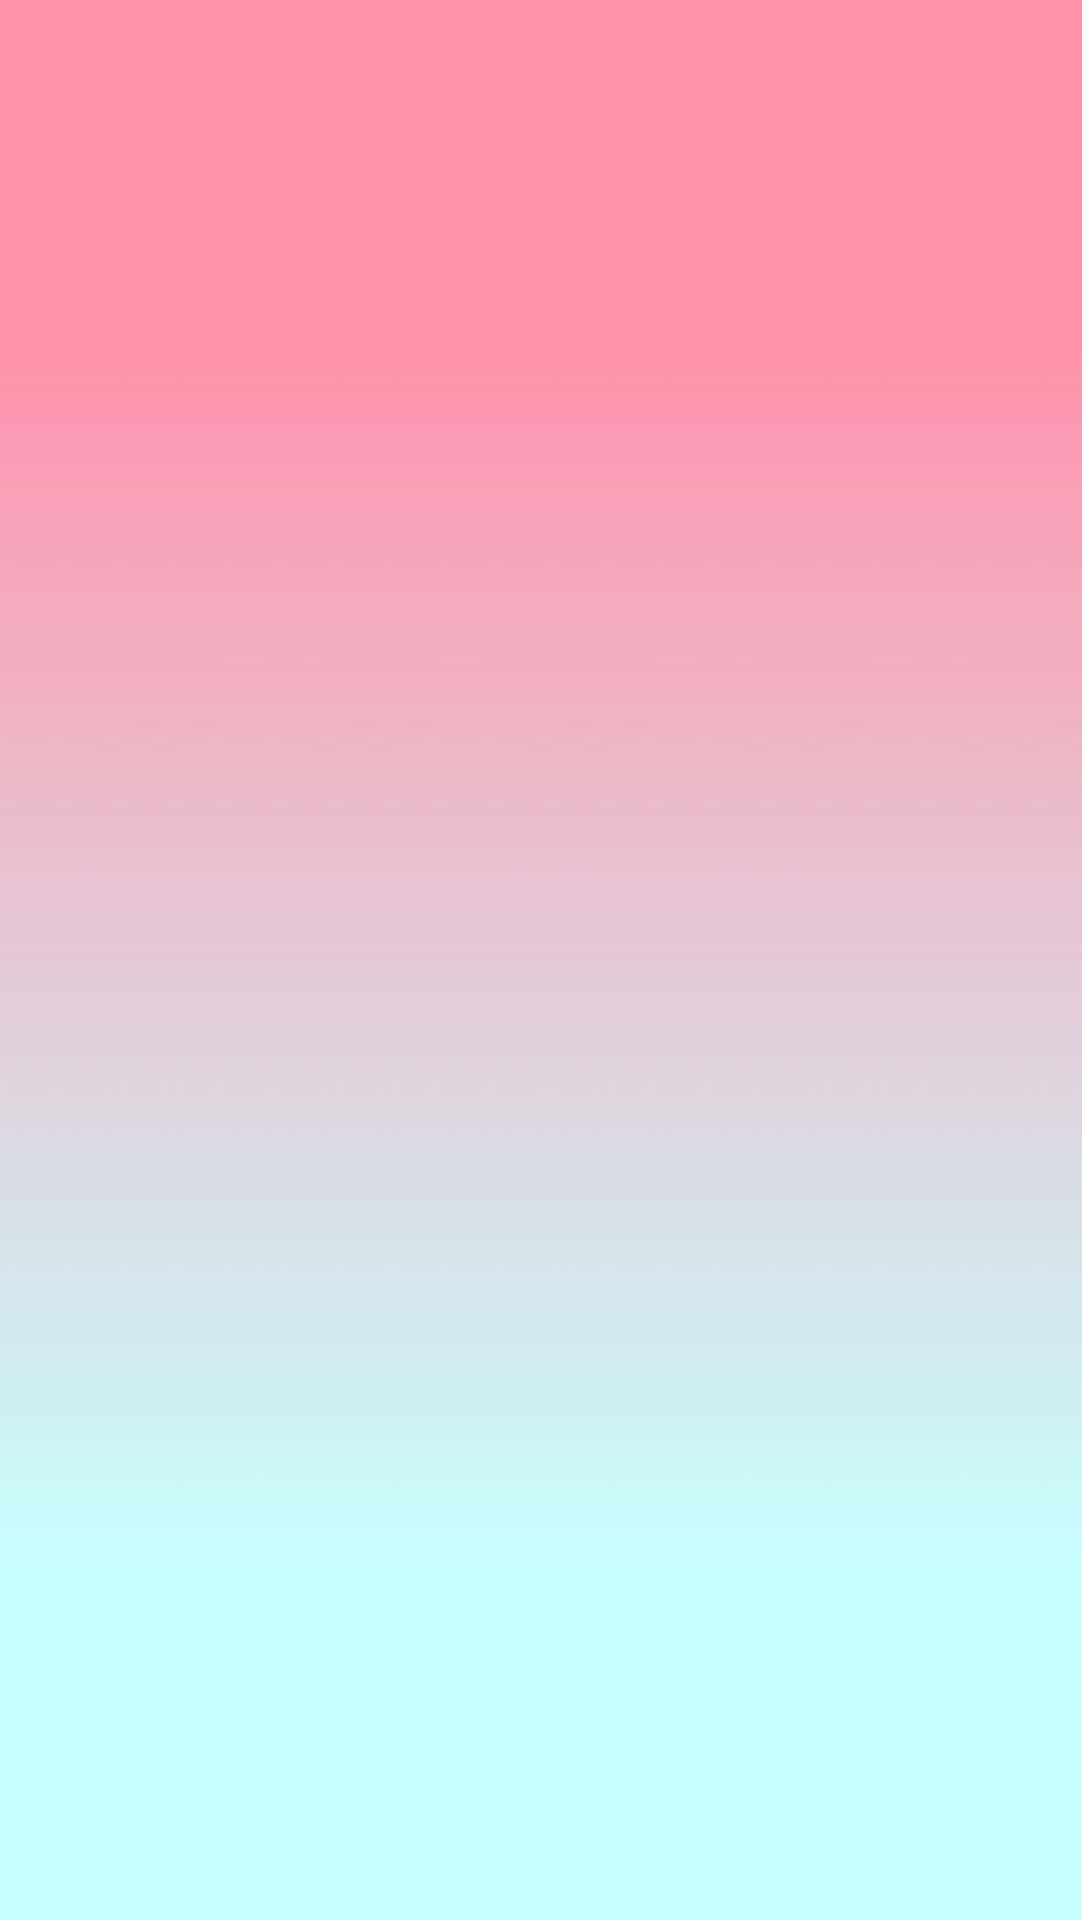 Create a magical pastel ombre look with this soft and subtle gradient! Wallpaper